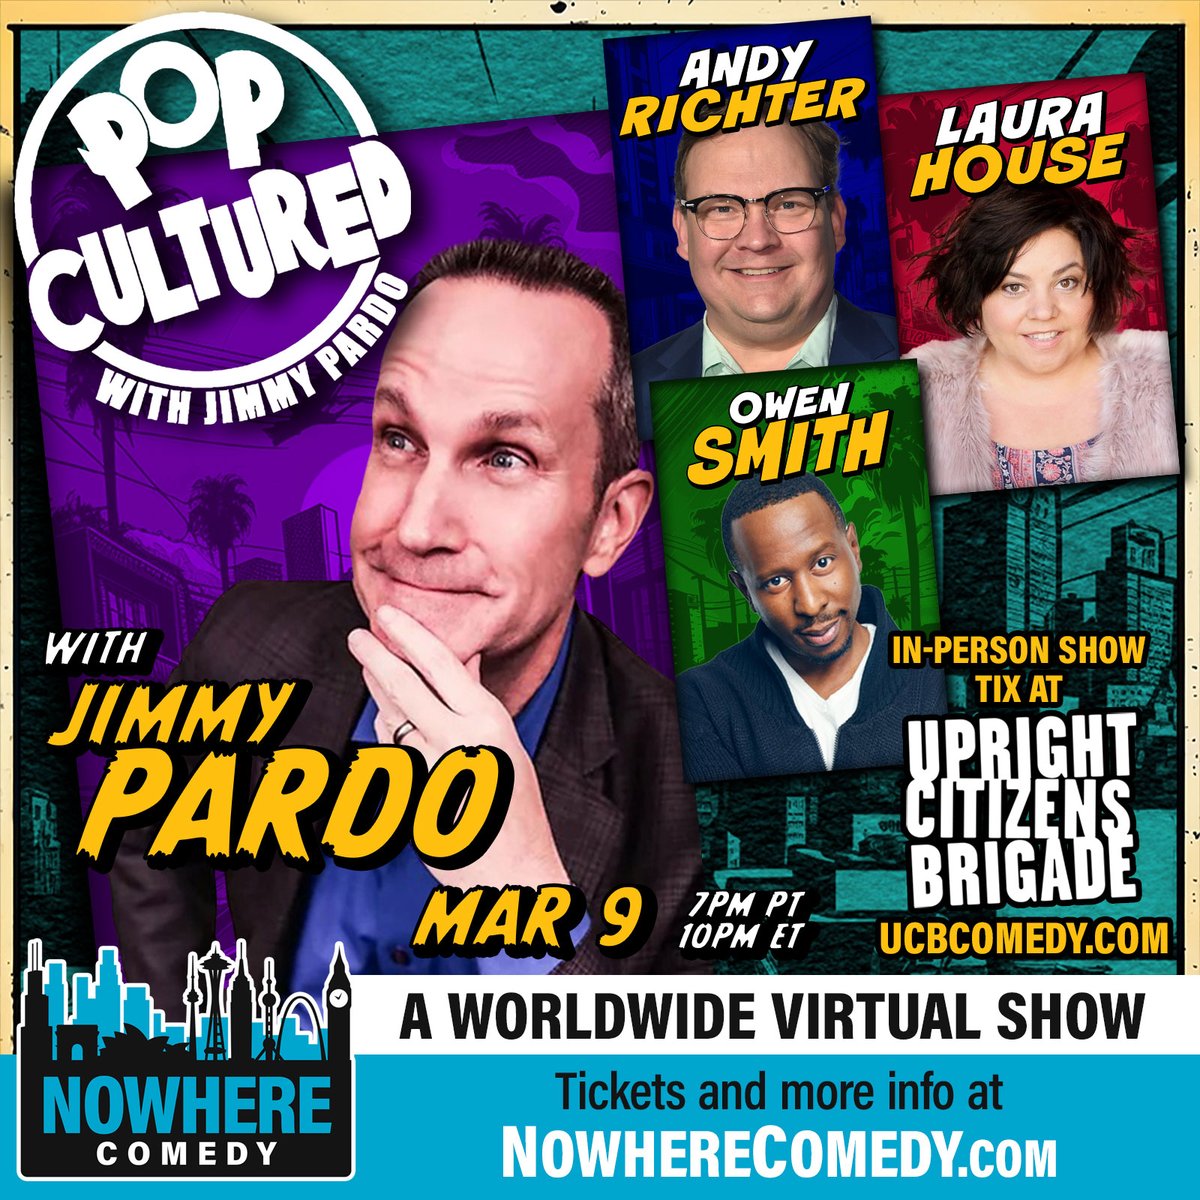 Ready for a comedy blast? Dive into #PopCultured with @jimmypardo! Laugh along with @AndyRichter, @imlaurahouse, @OwenSmith4Real. Wacky games, endless laughs await at NowhereComedy.com